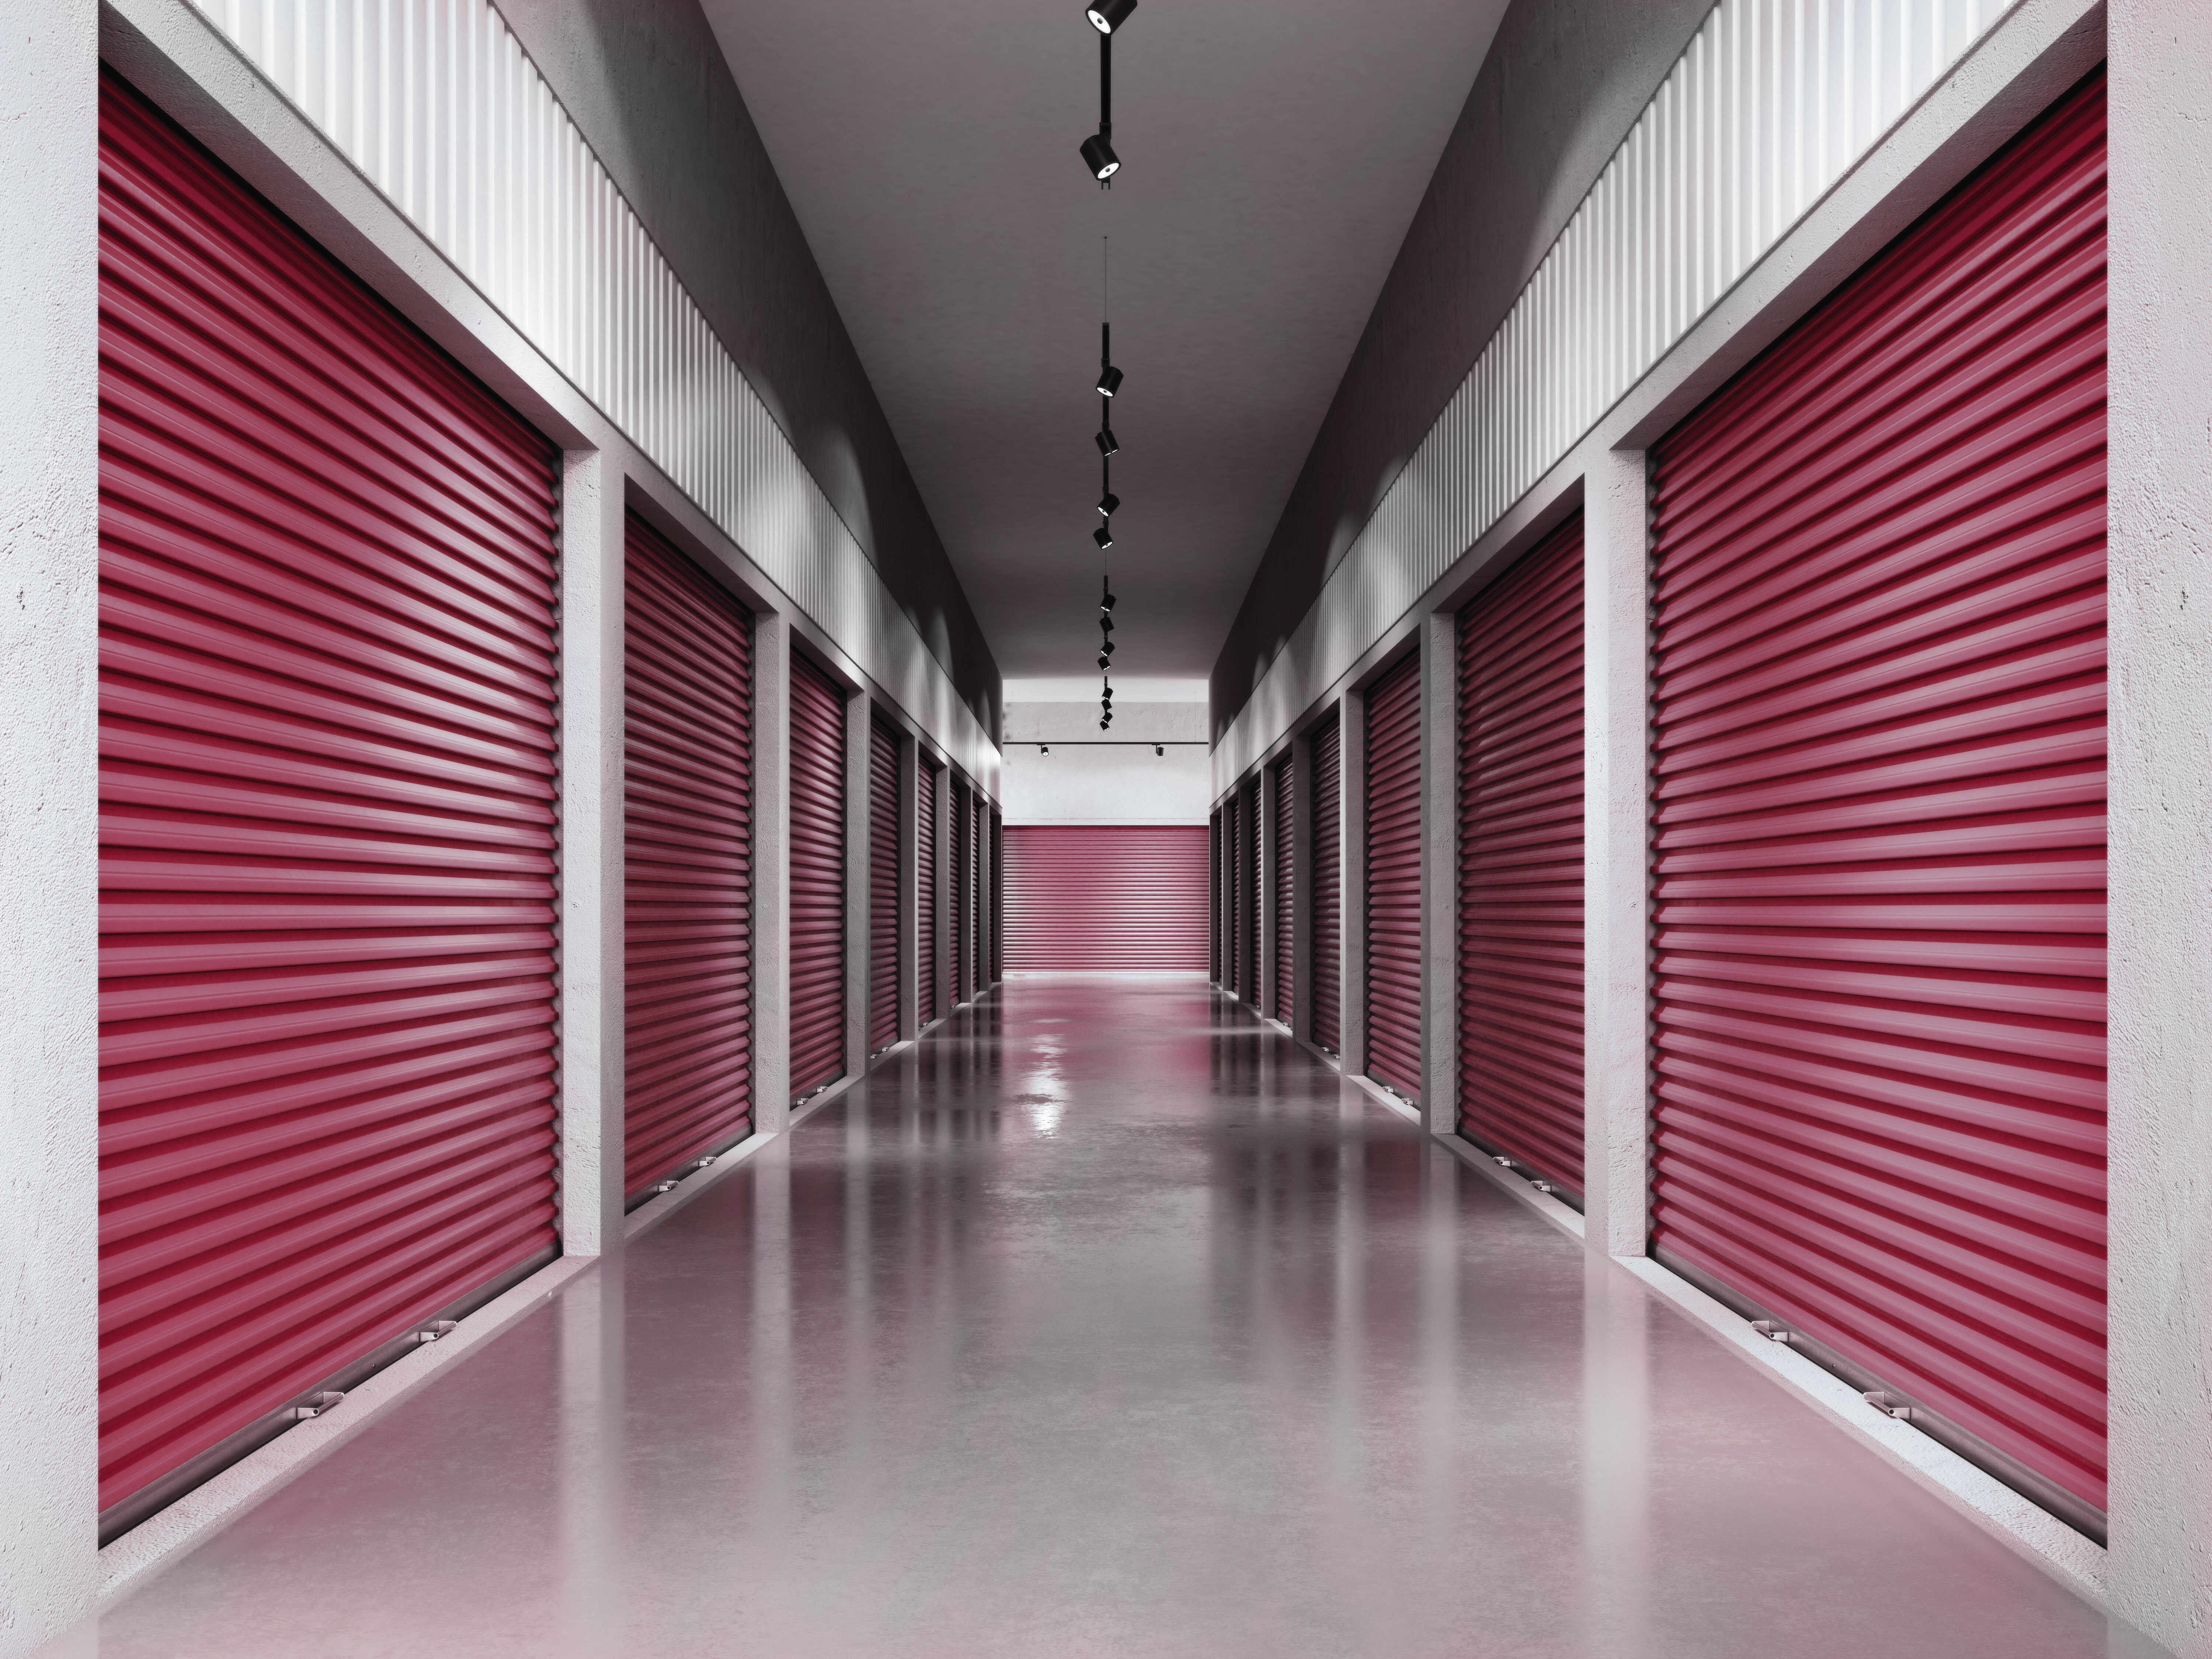 Self Storage Facility with red unit doors